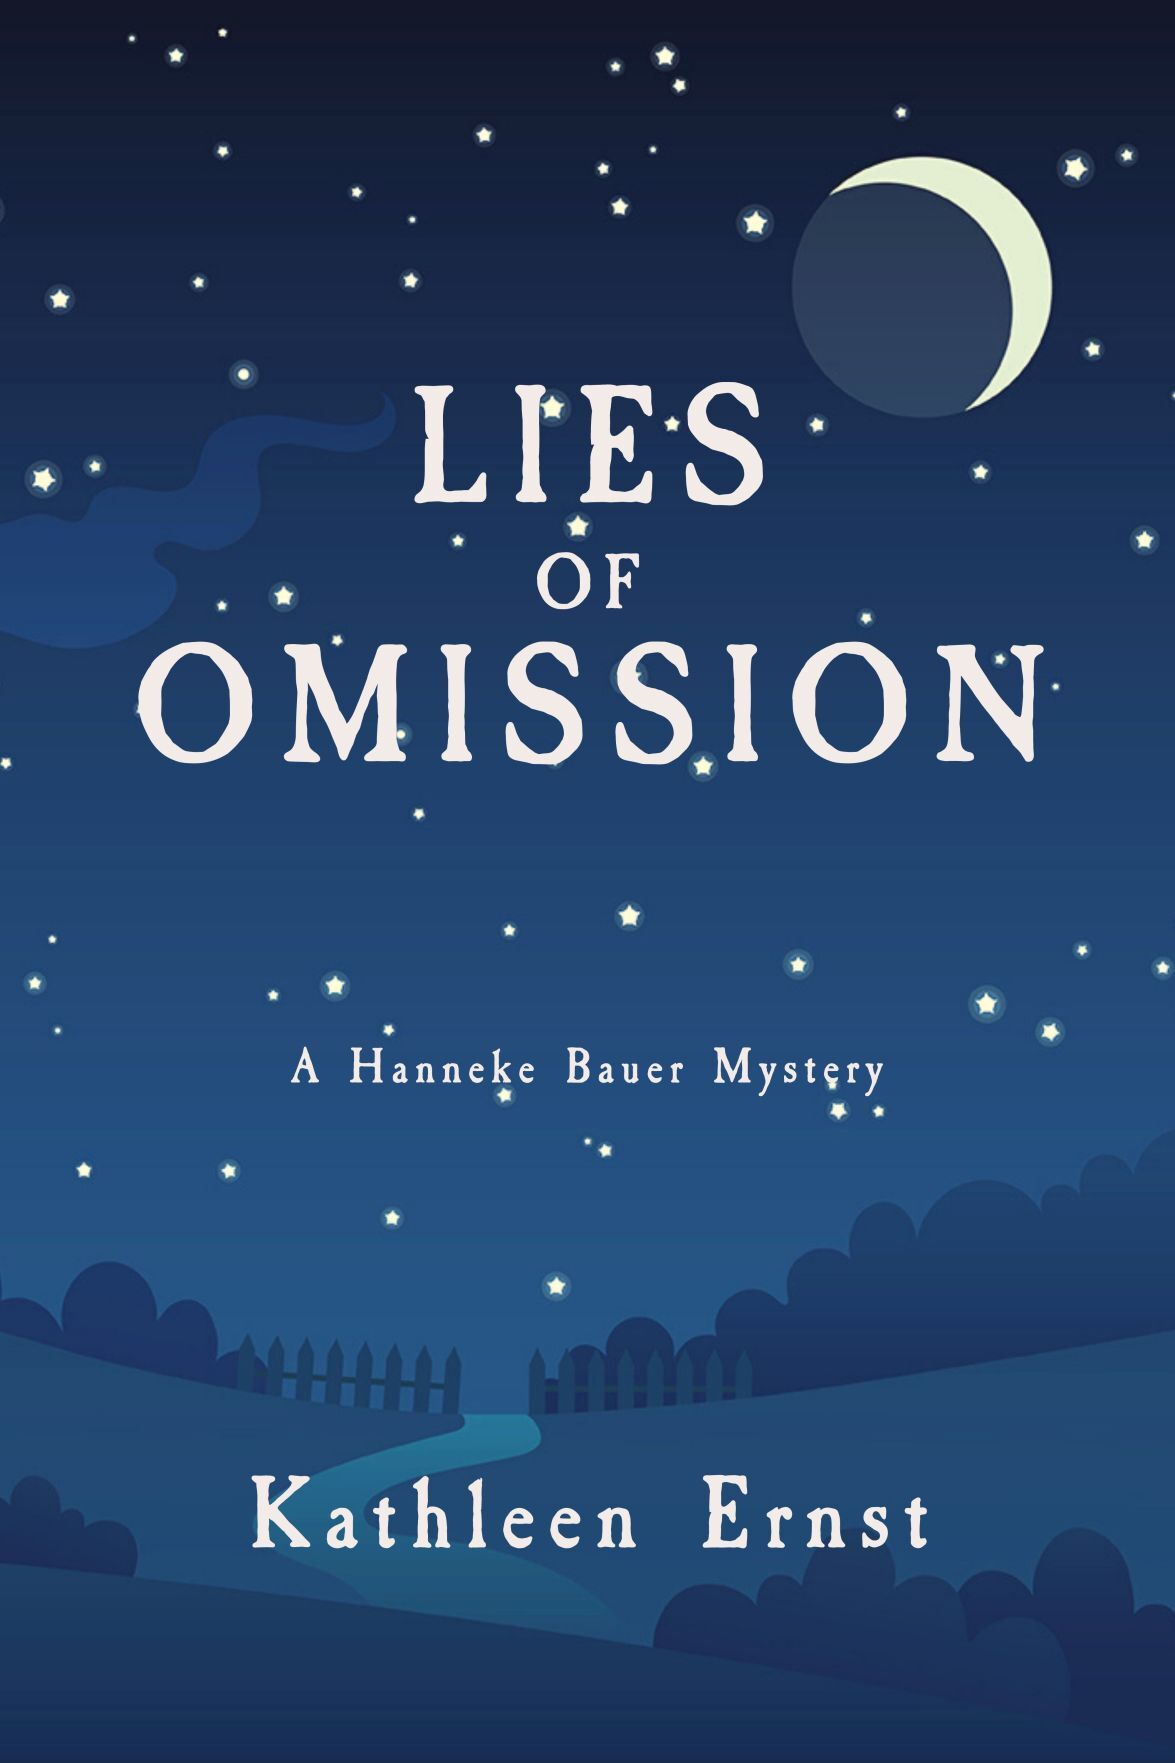 LIES OF OMISSION